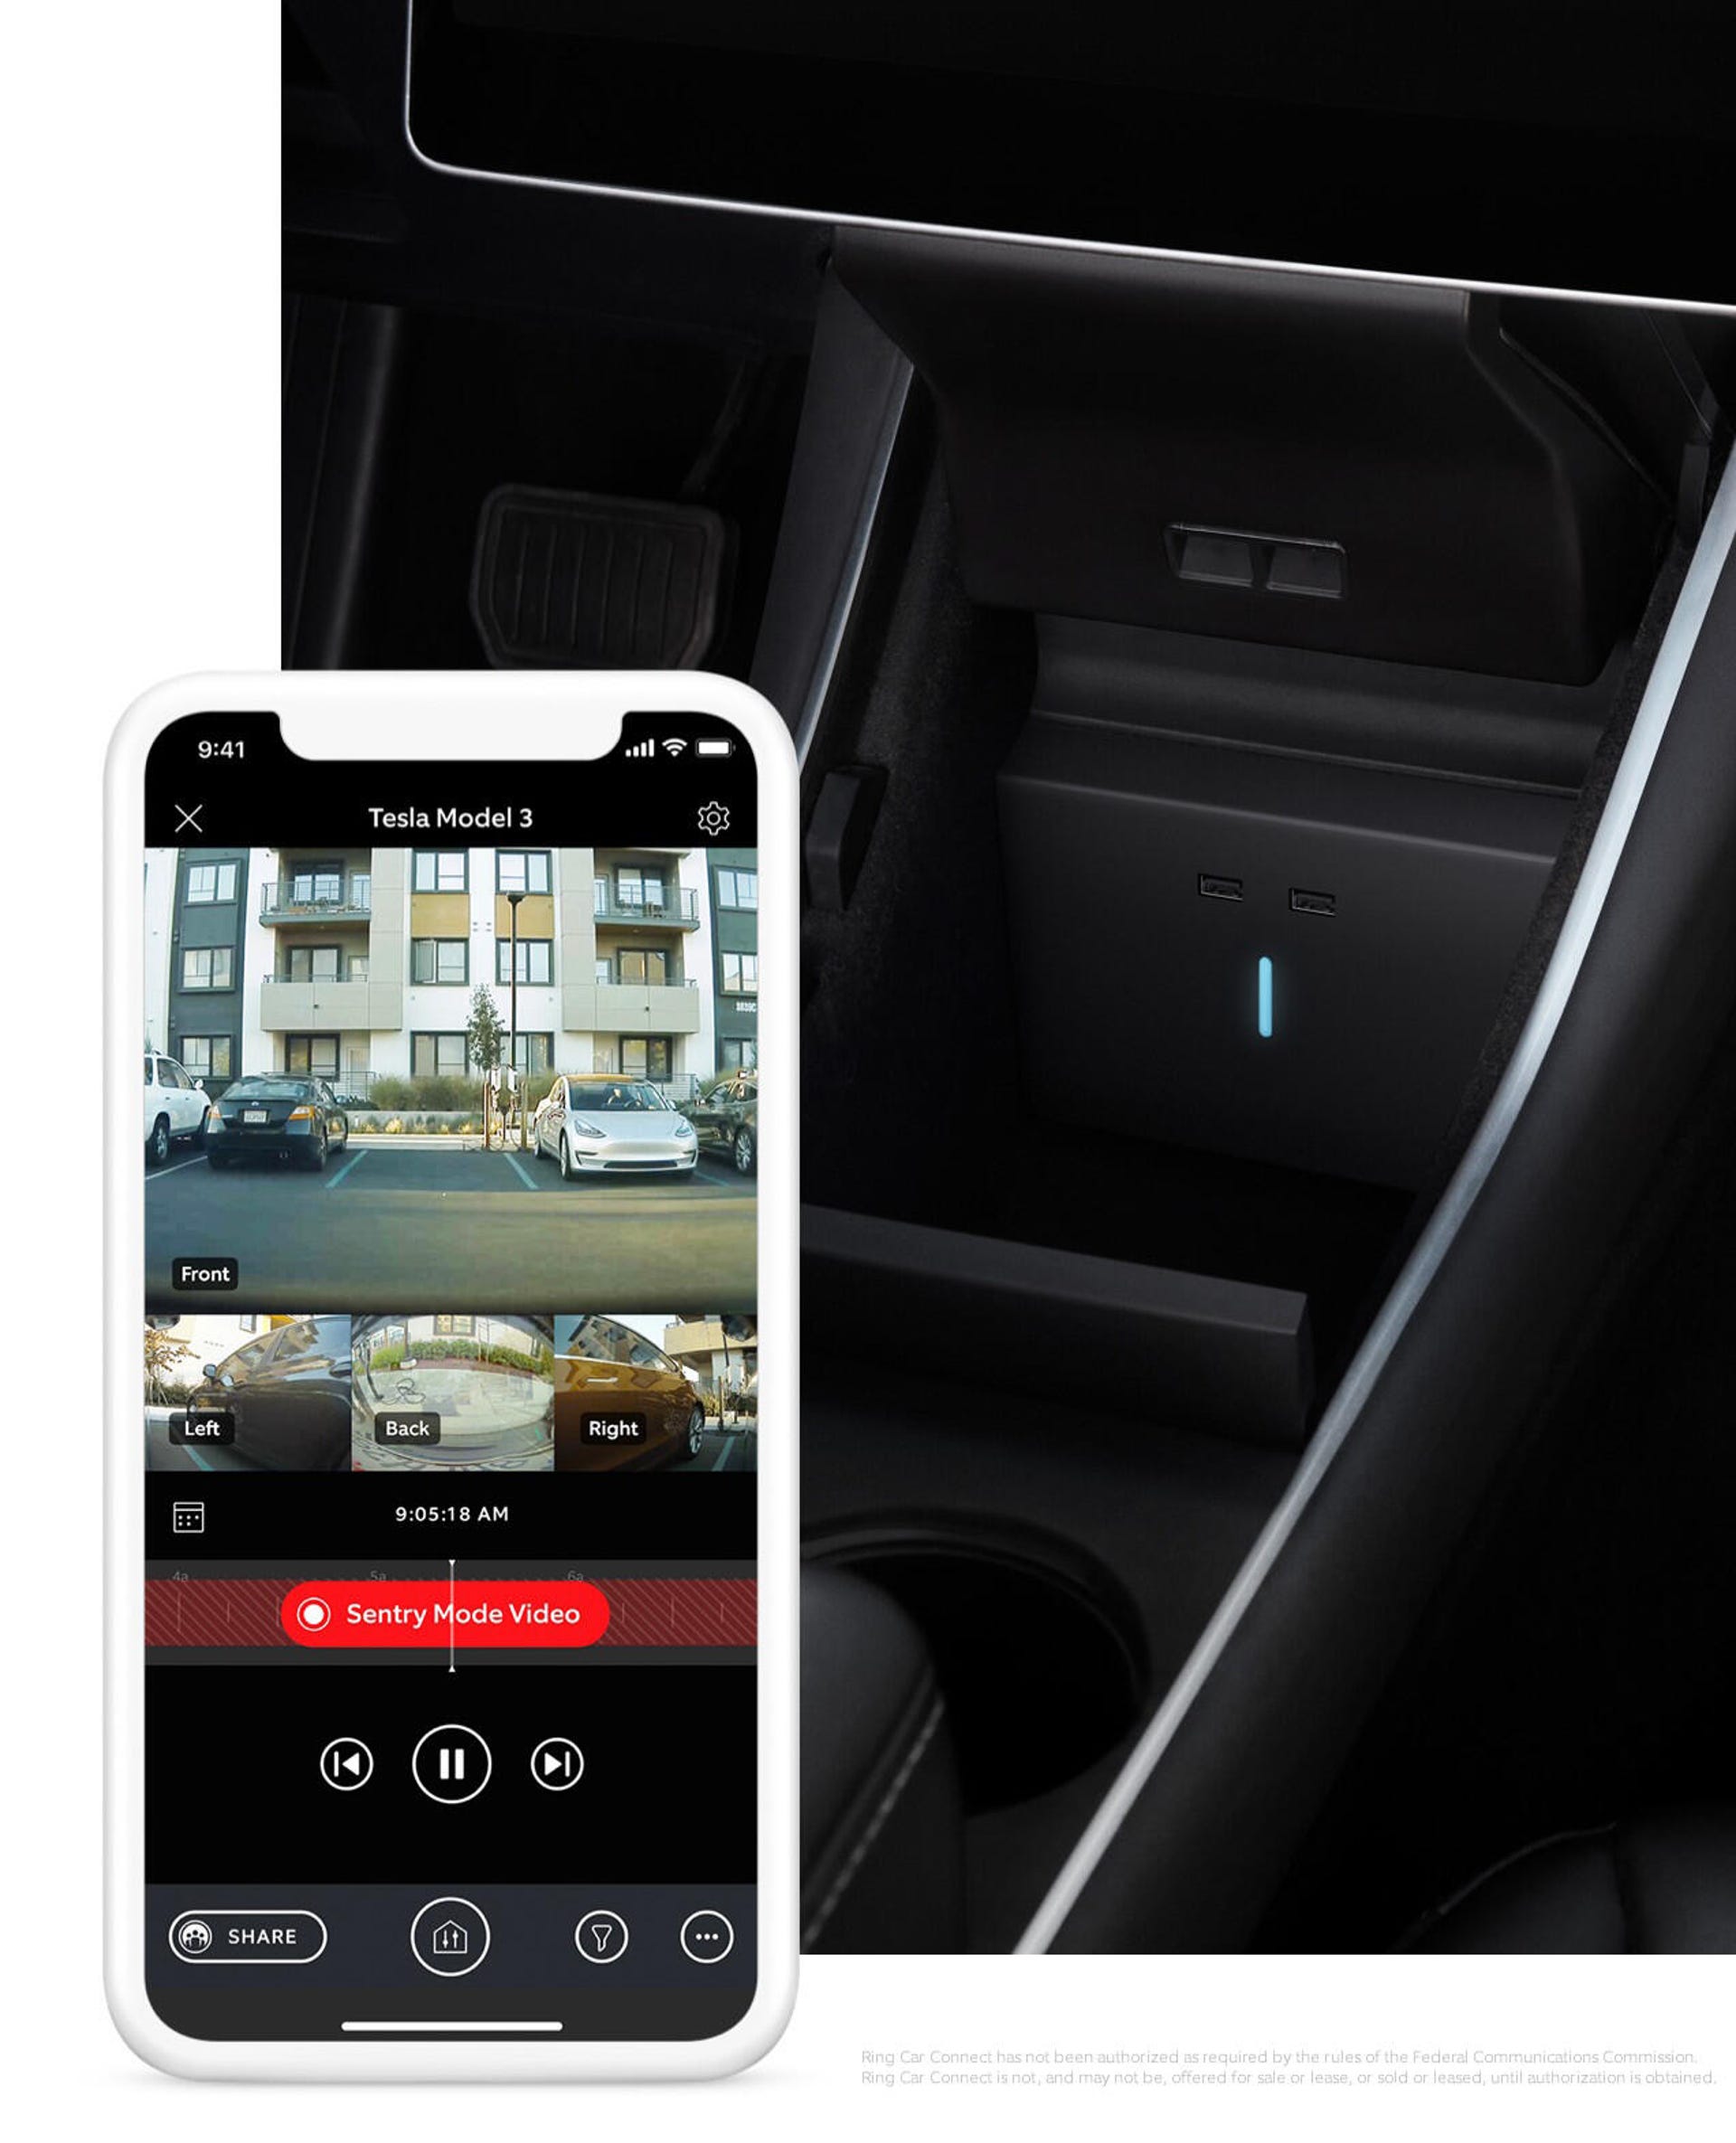 The Ring Car Connect app